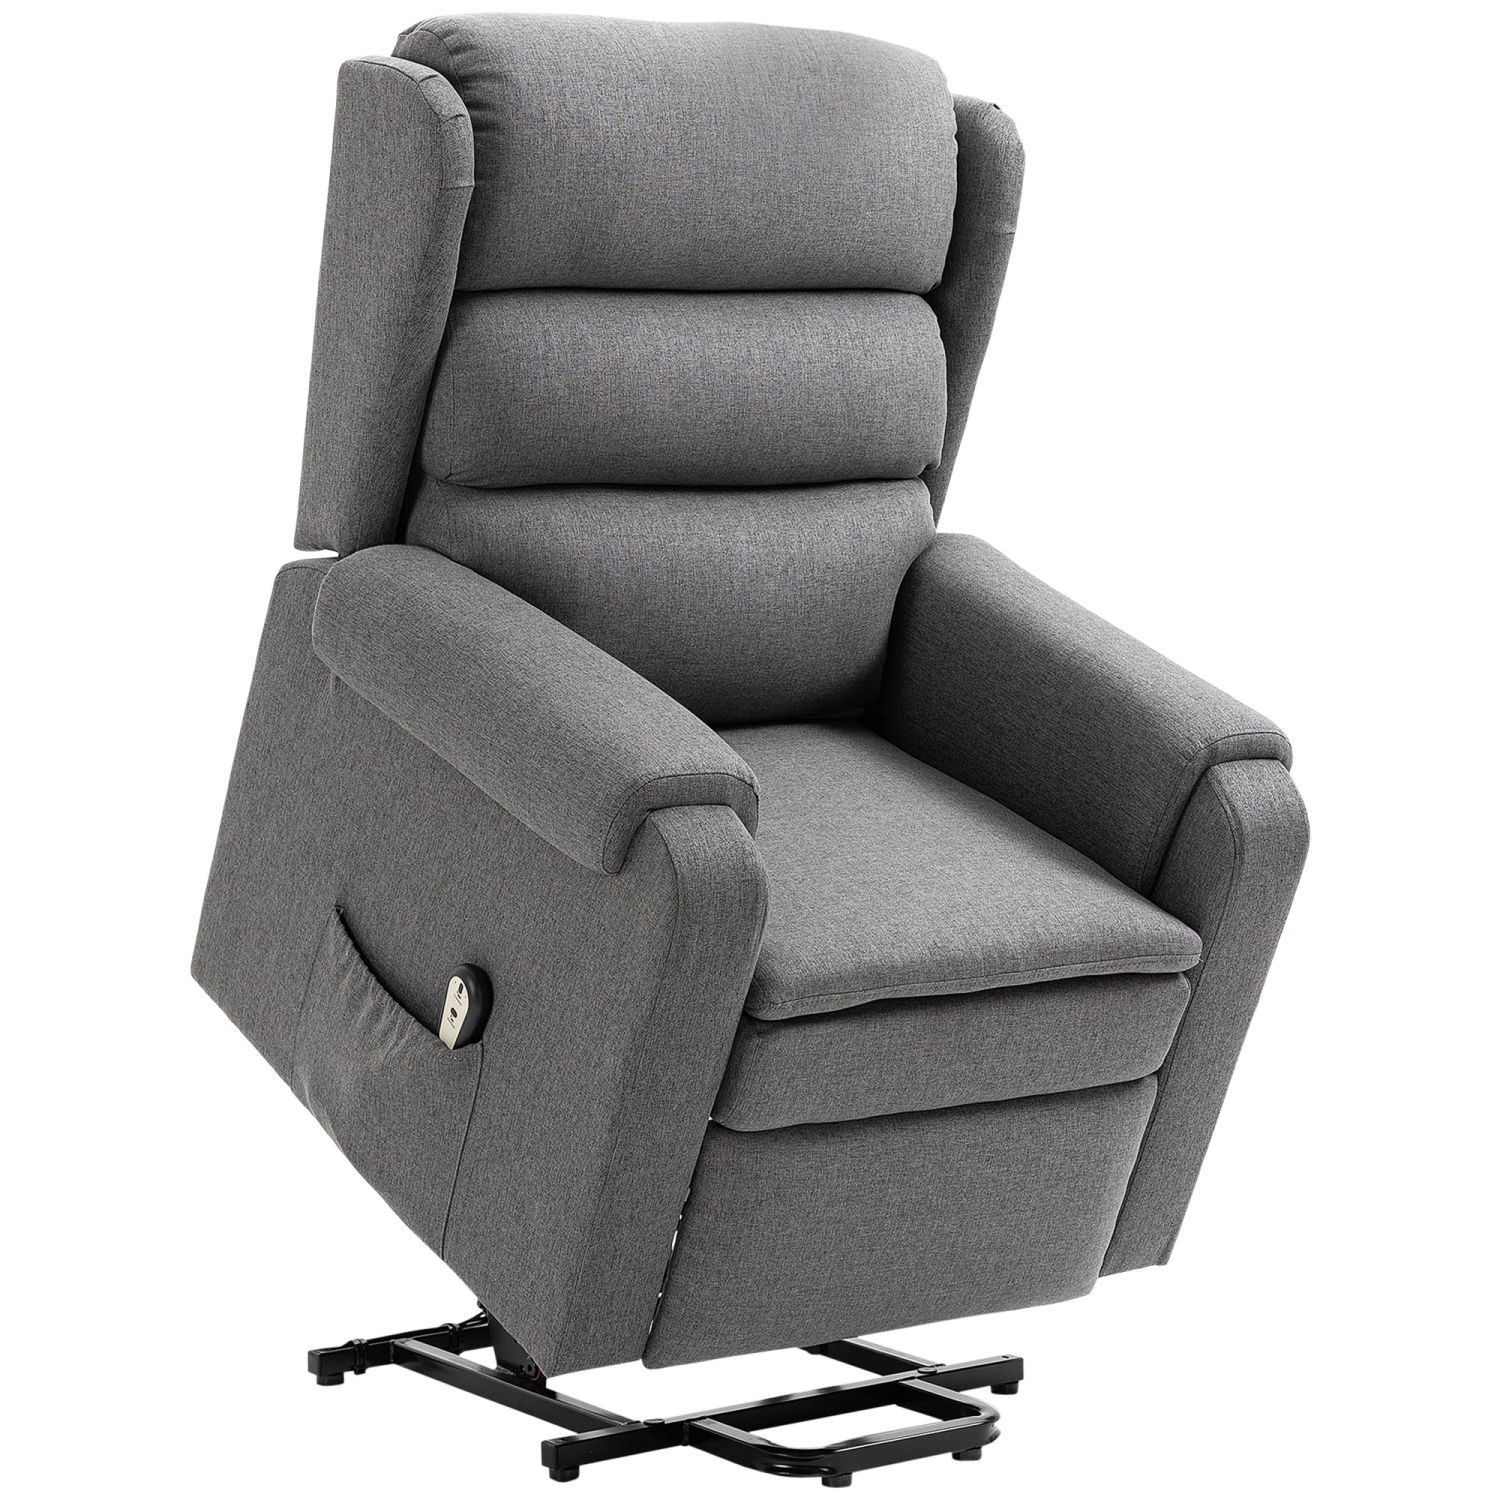 HOMCOM Power Lift Recliner Chair for Elderly, Fabric Electric Stand-Up Sofa, Heavy-Duty Reclining Chair with Pockets for Living Room, Dark Grey